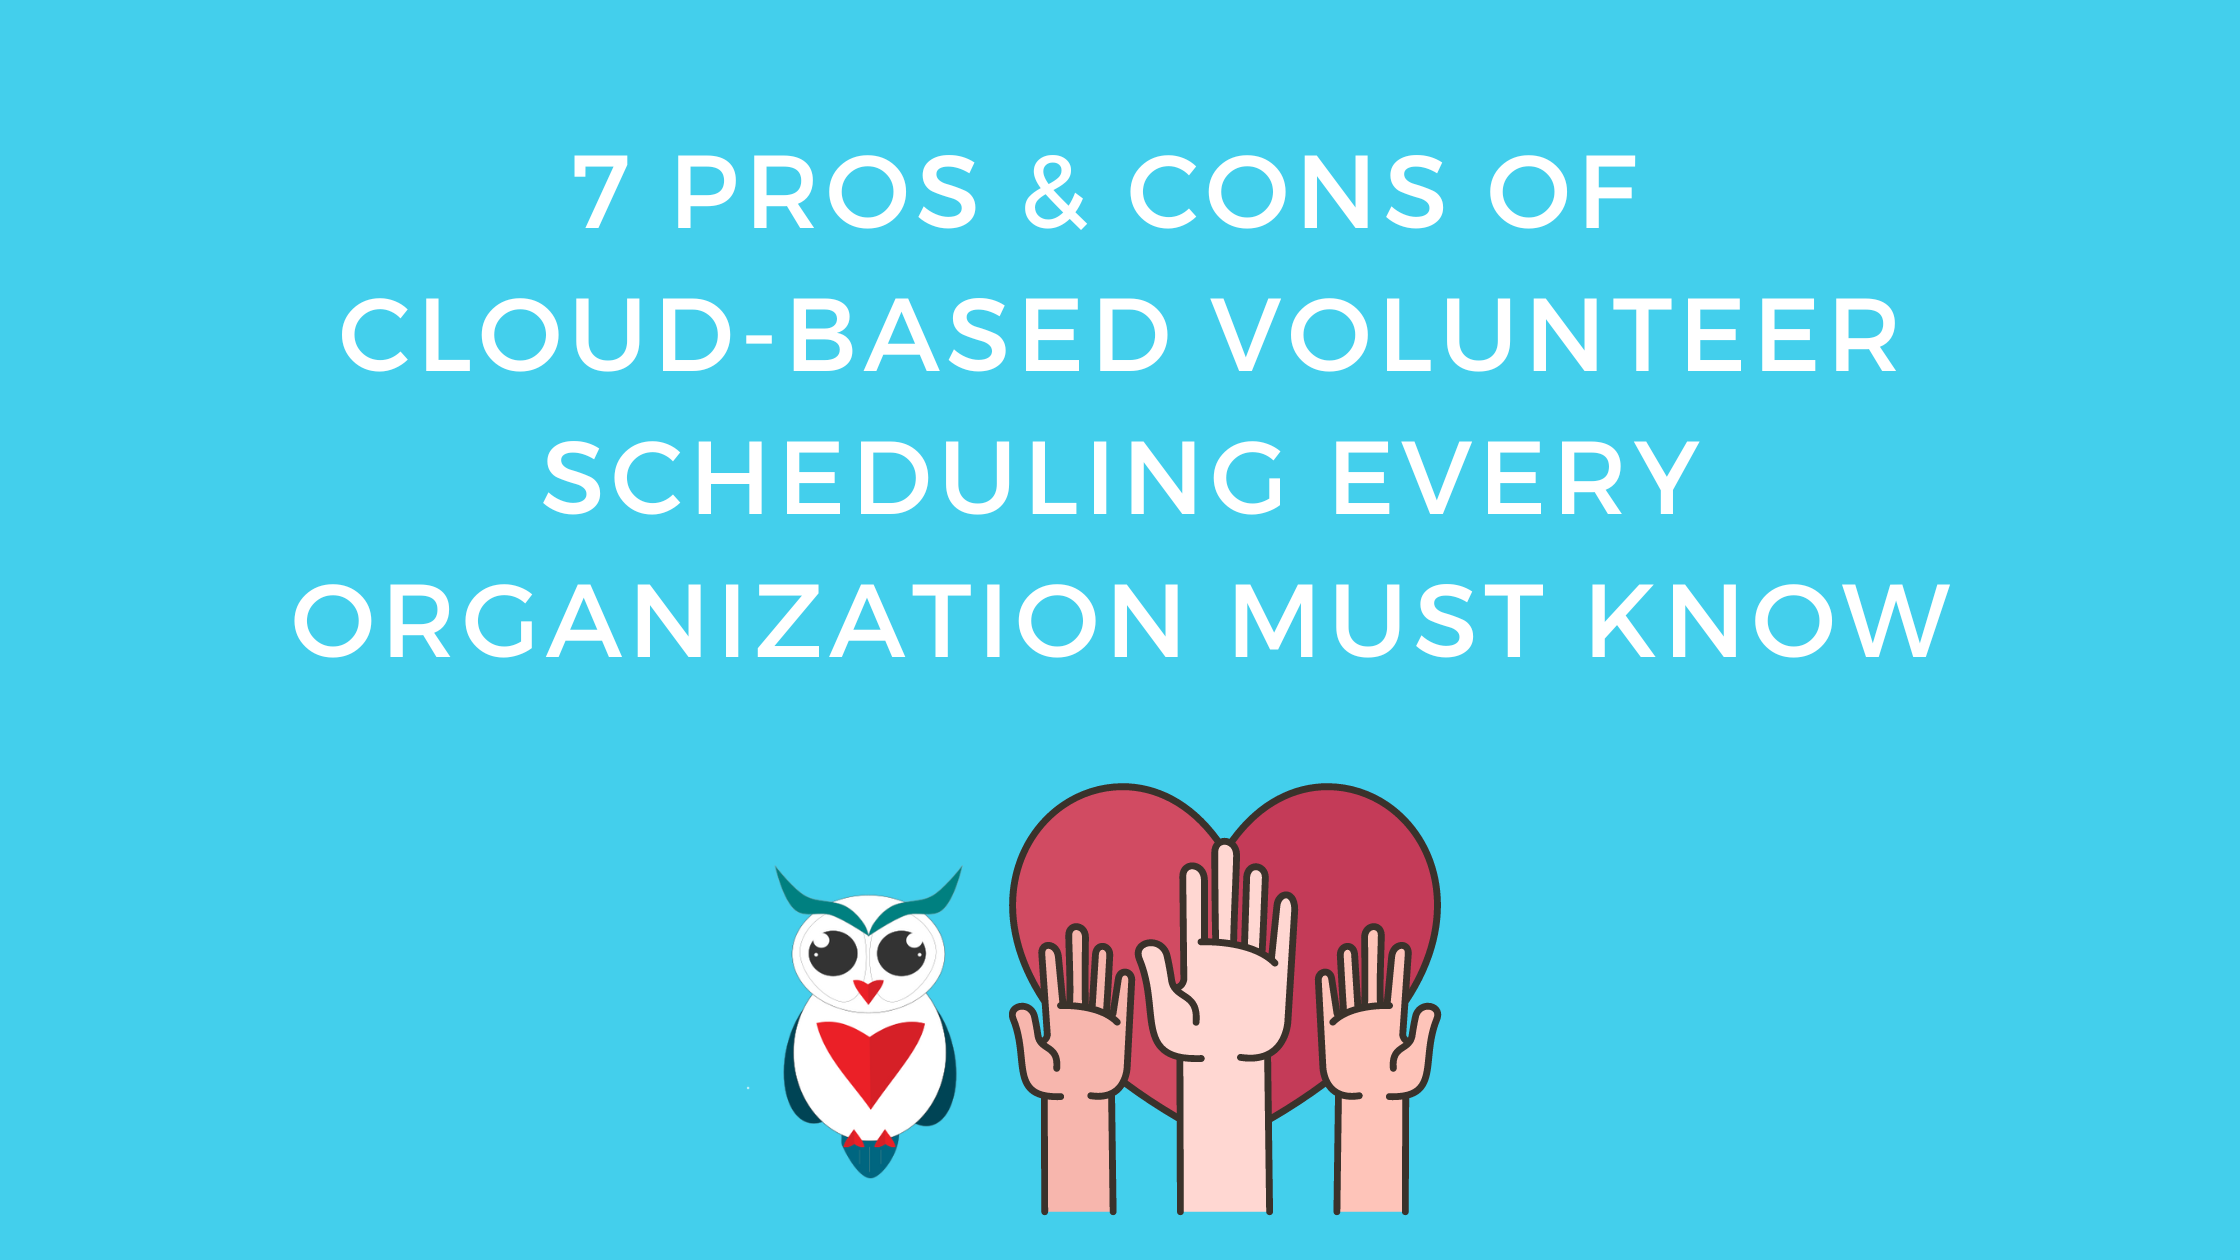 7 Pros & Cons of Cloud-Based Volunteer Scheduling Every Organization Must Know